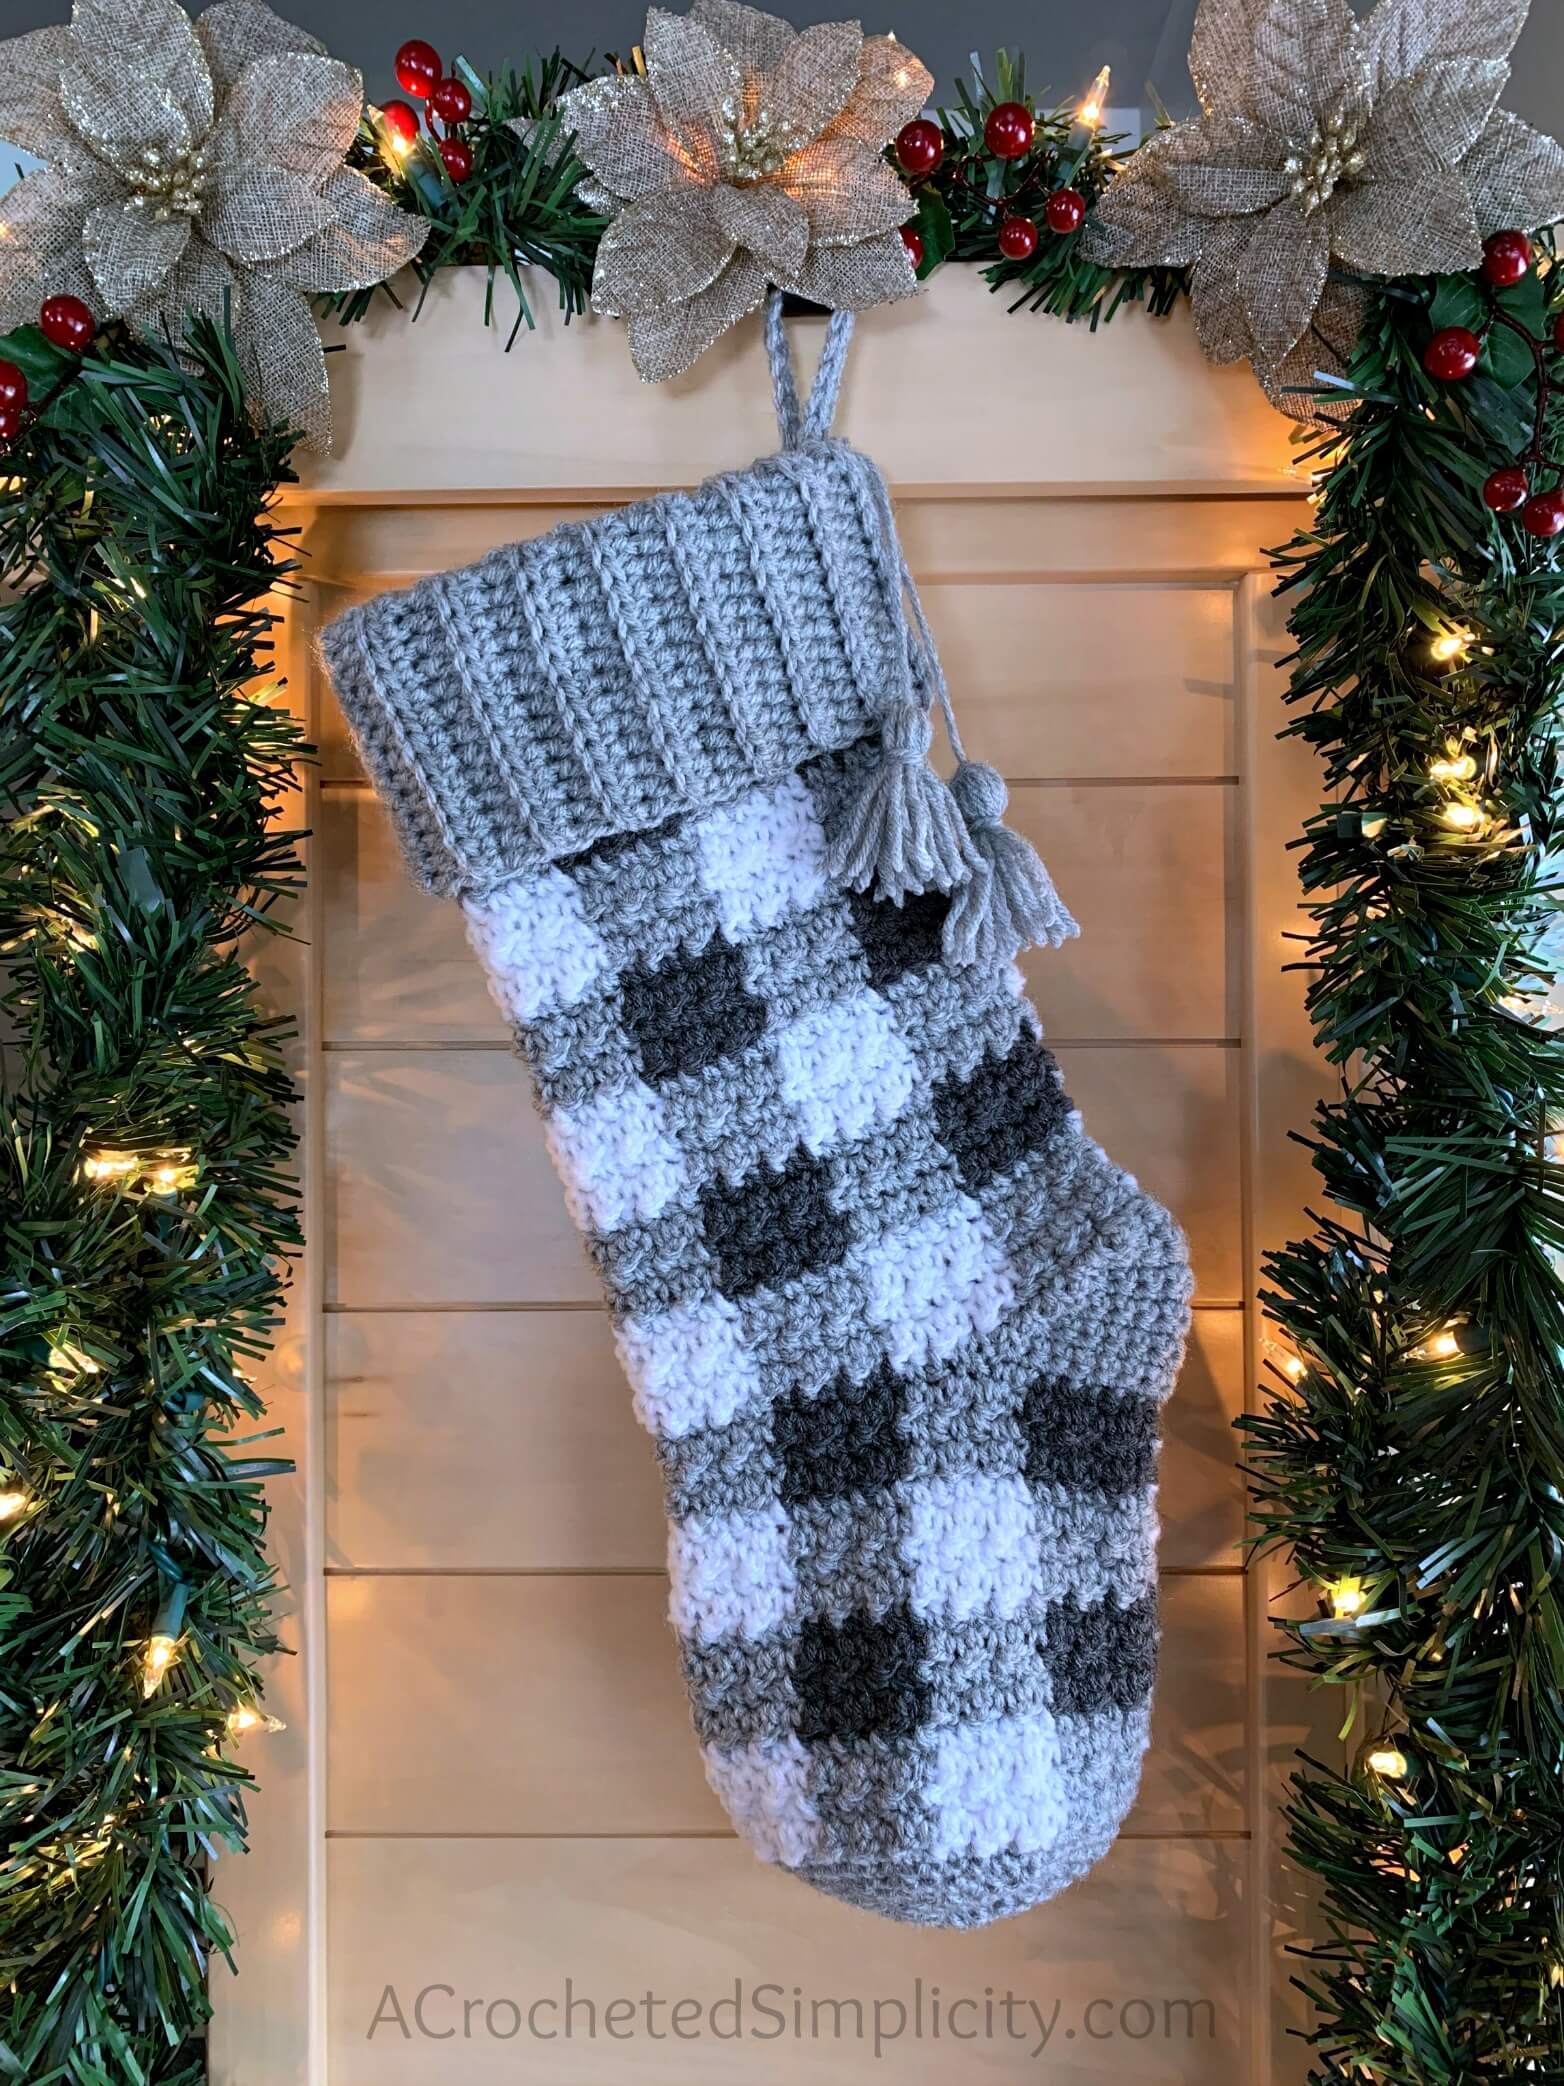 Homemade Check Pattern Grey Stockings For DecorationCrochet Christmas Stocking Patterns